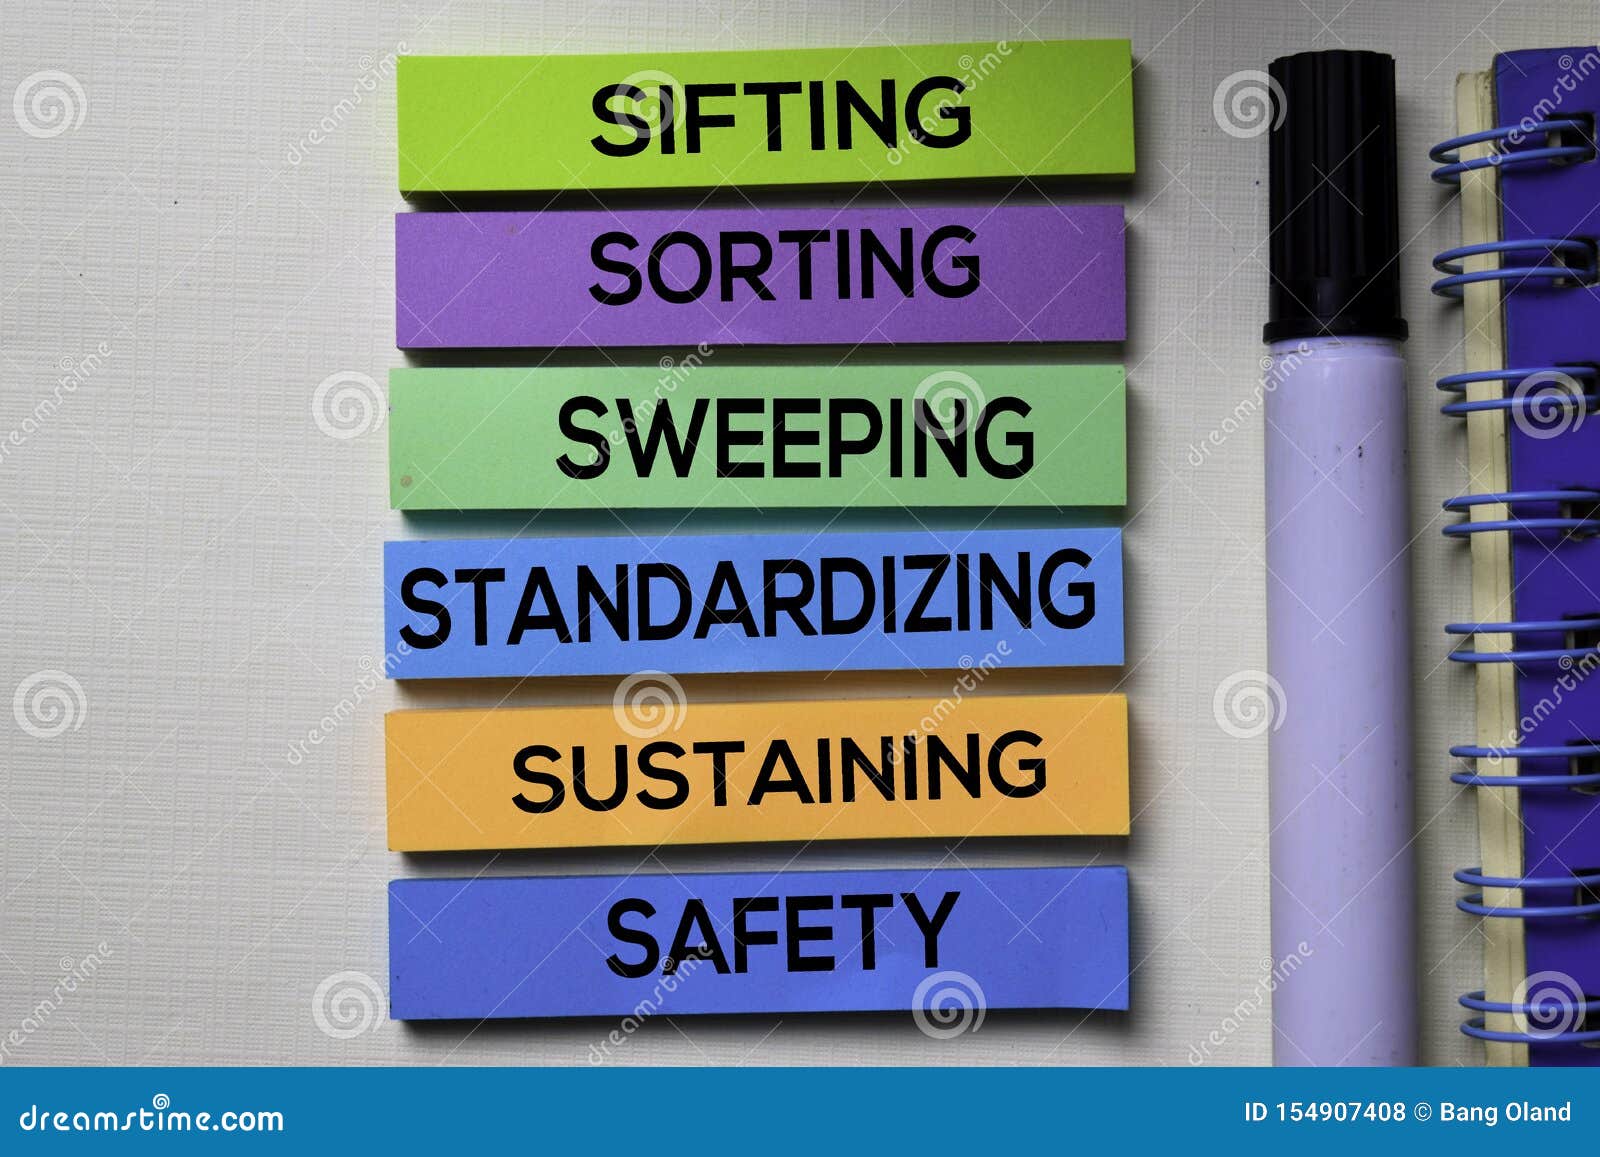 sifting sorting sweeping standardizing sustaining safety - 6s text on sticky notes  on office desk